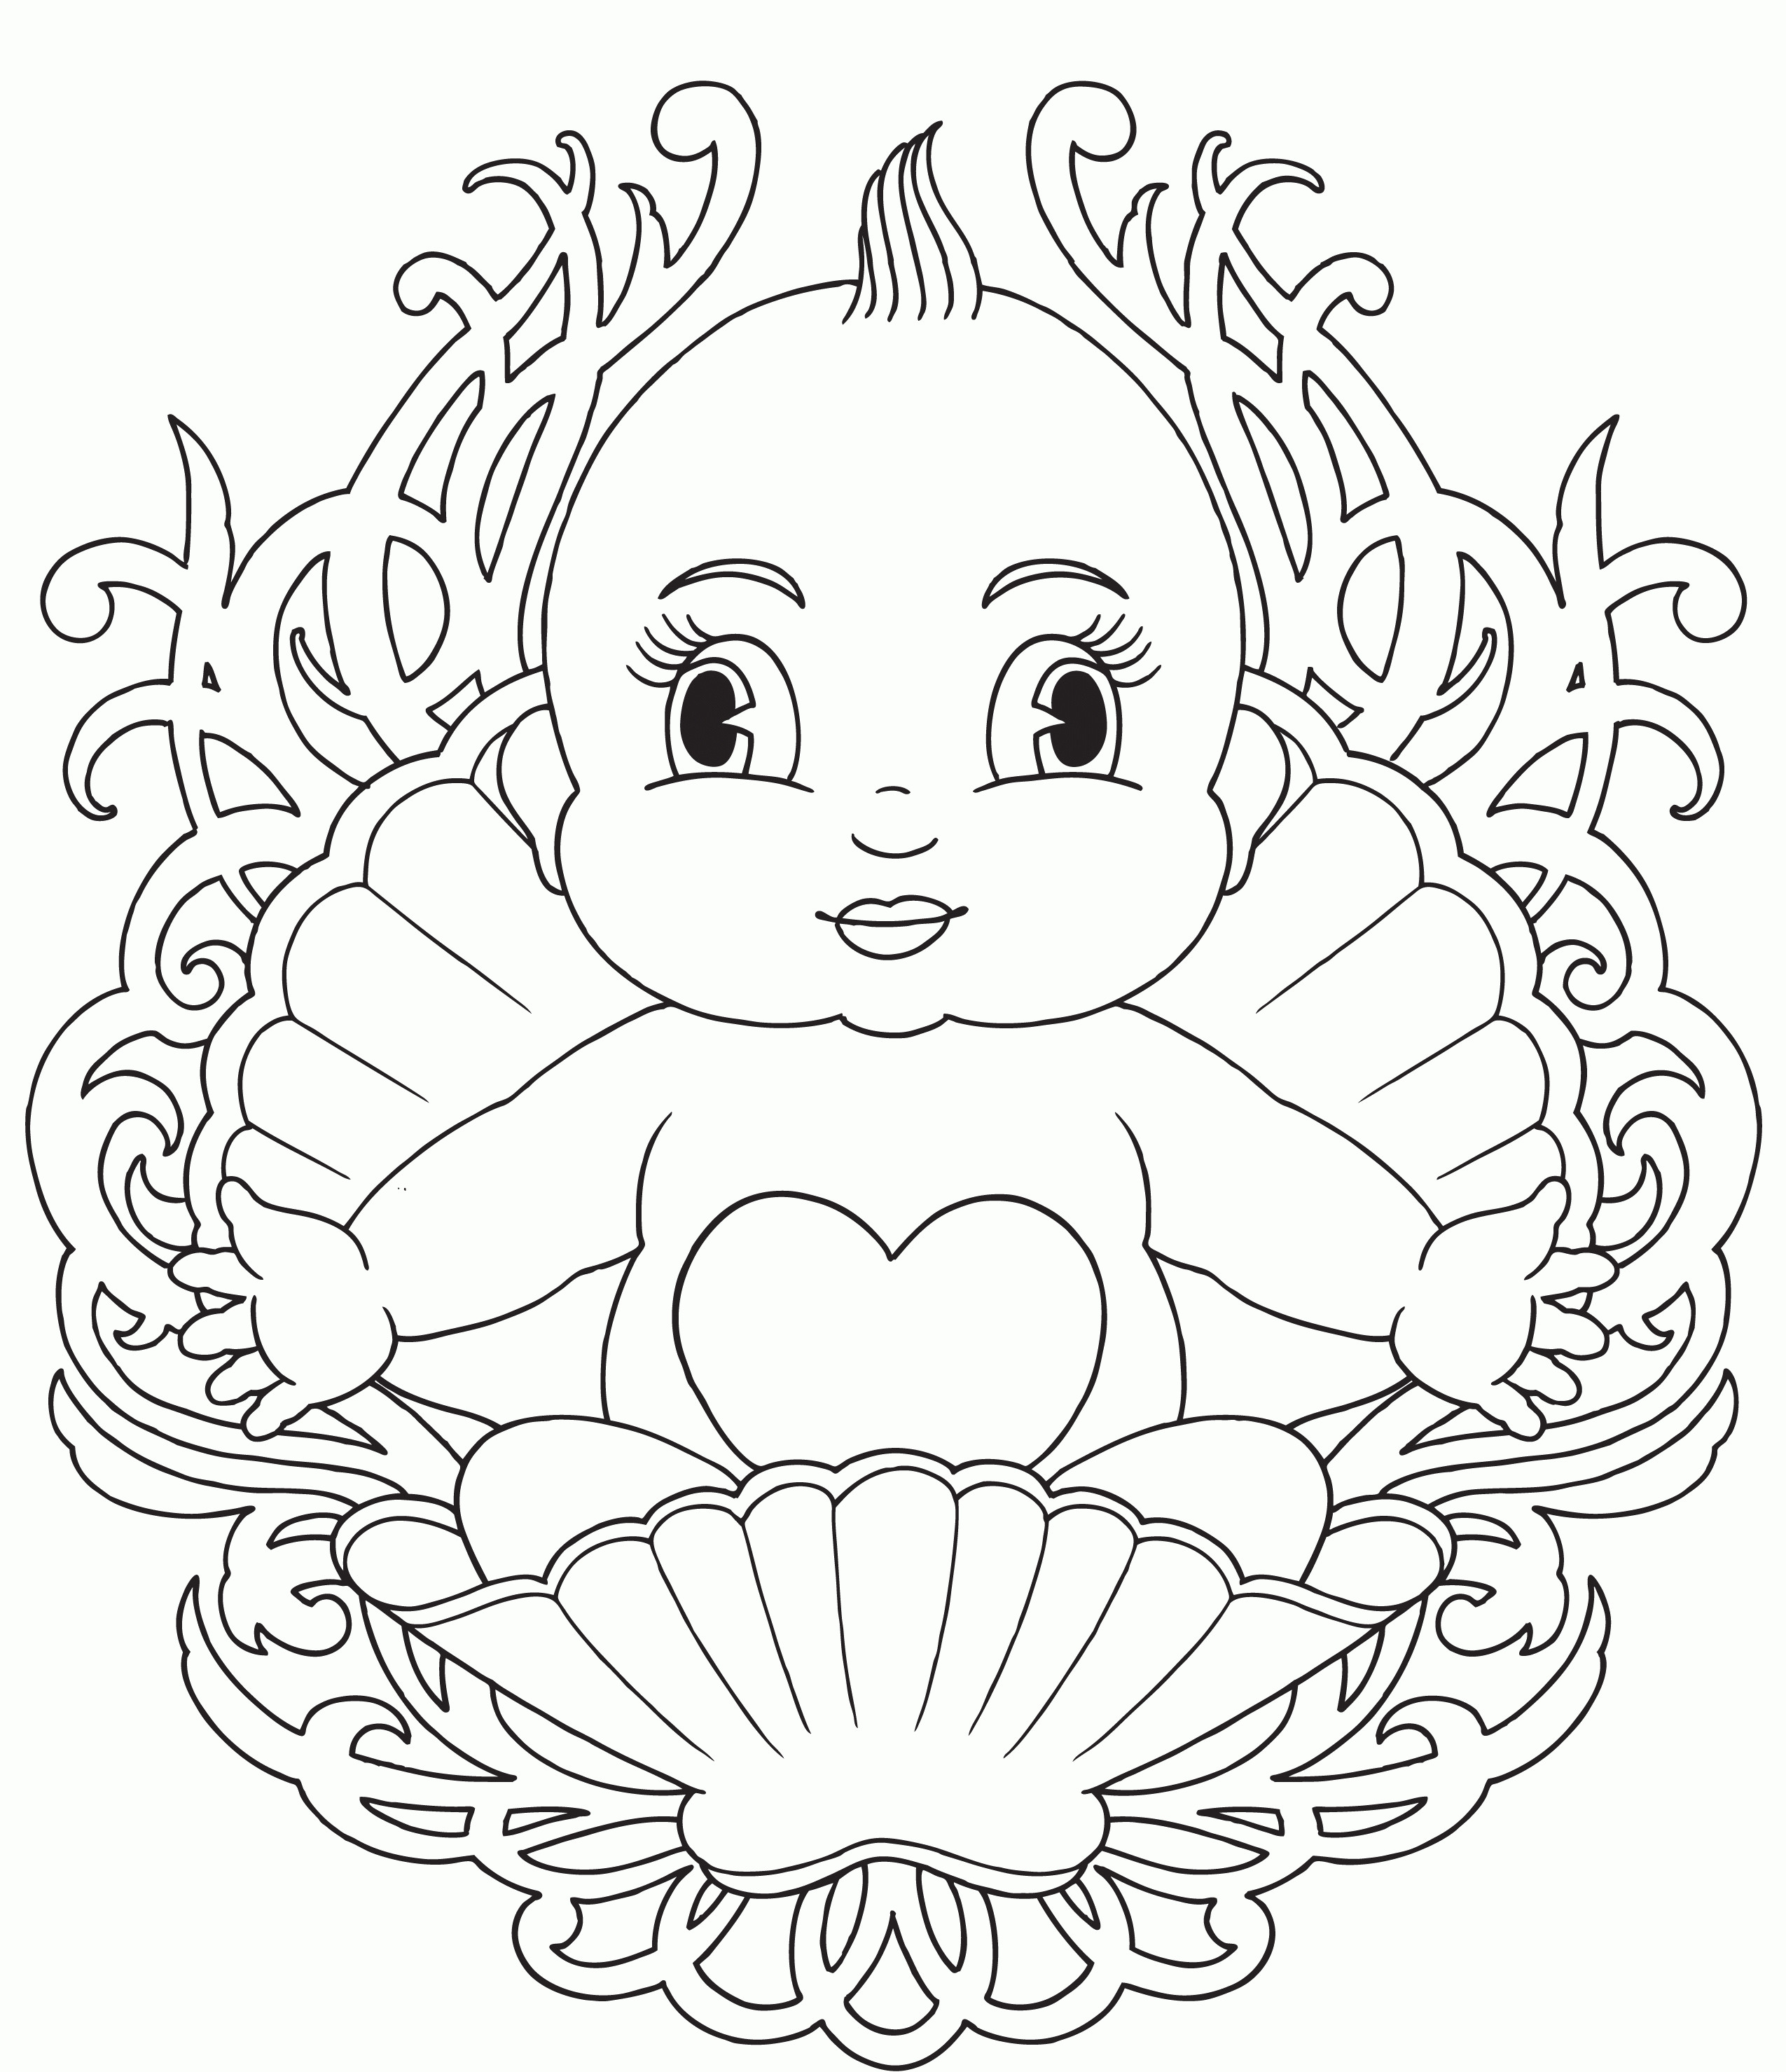 The Best Ideas for Newborn Baby Girl Coloring Pages - Home Inspiration